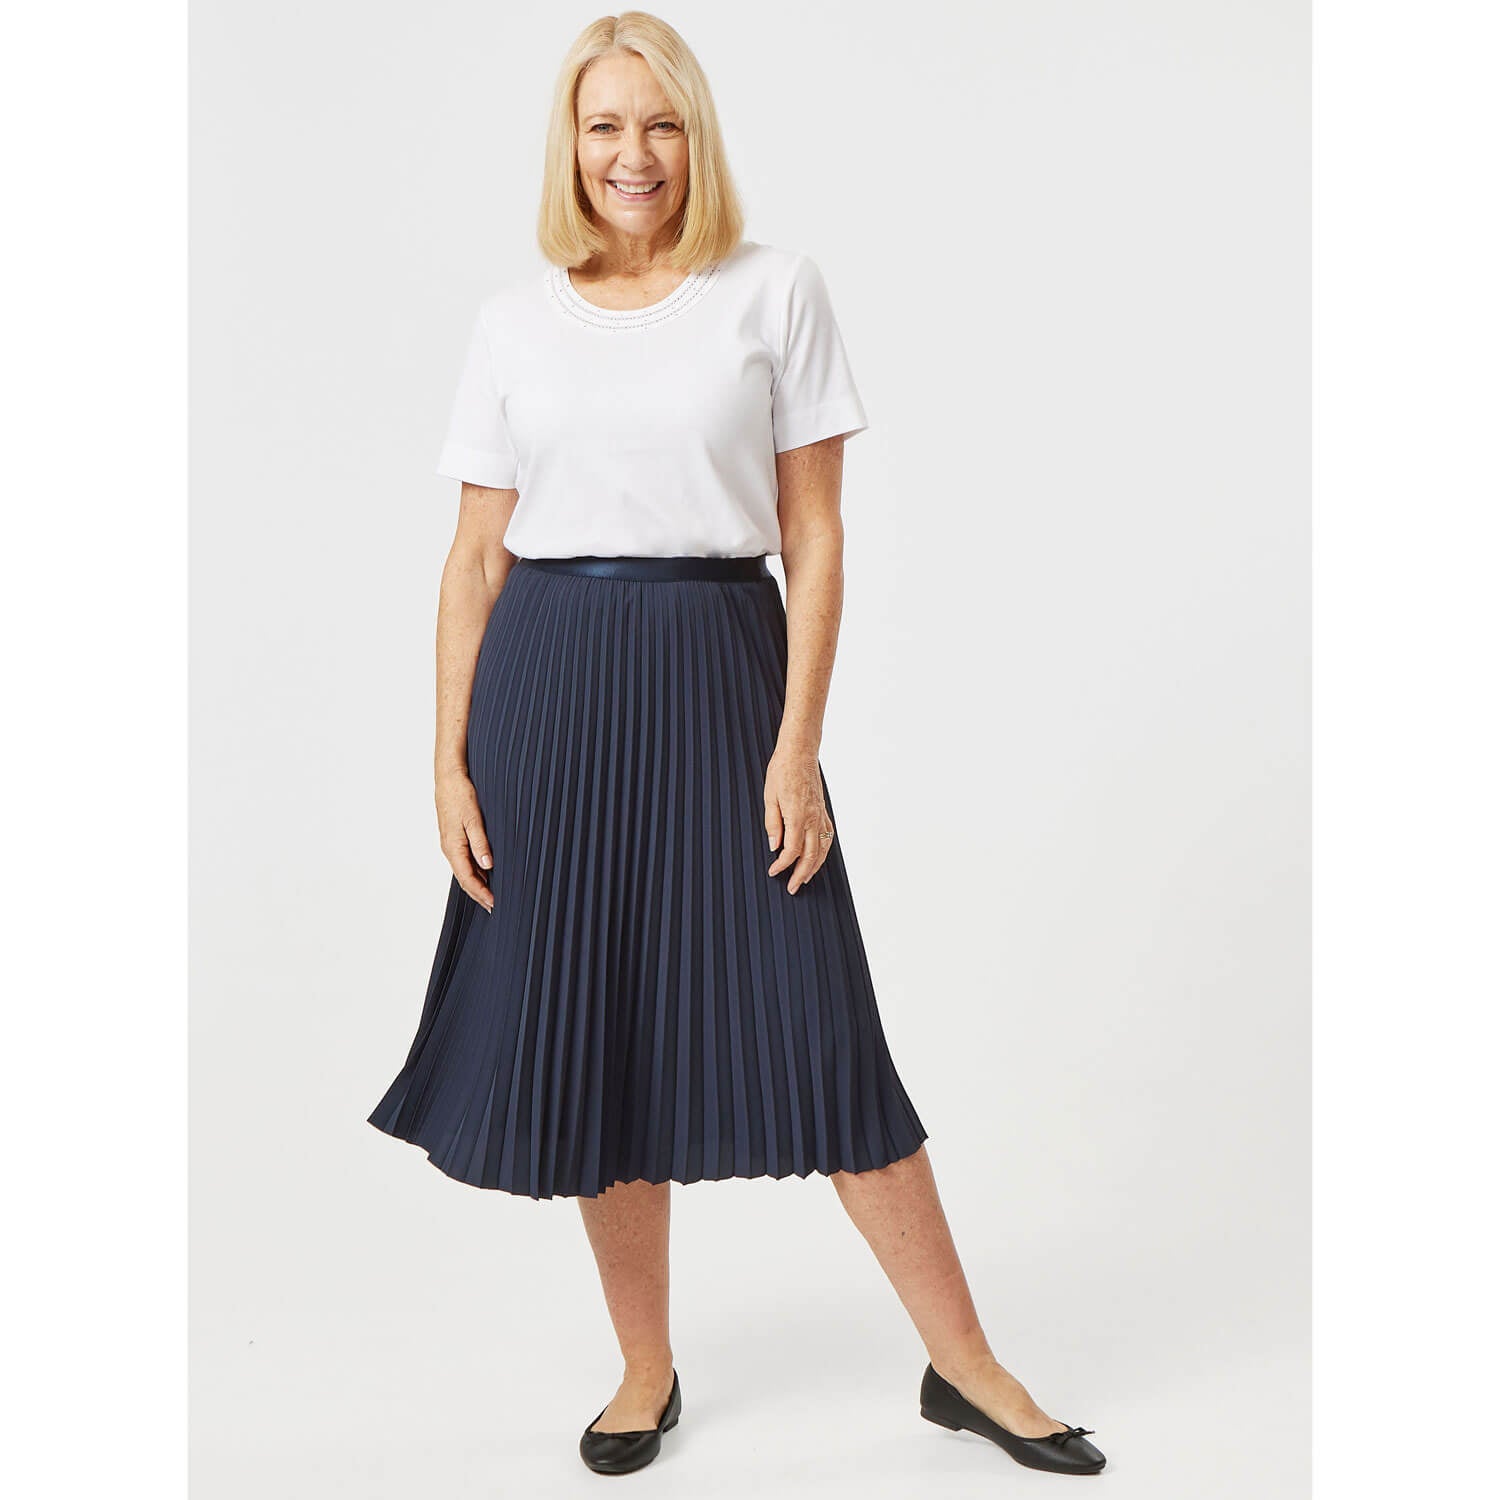 Tigiwear Pleated Solid Skirt 1 Shaws Department Stores